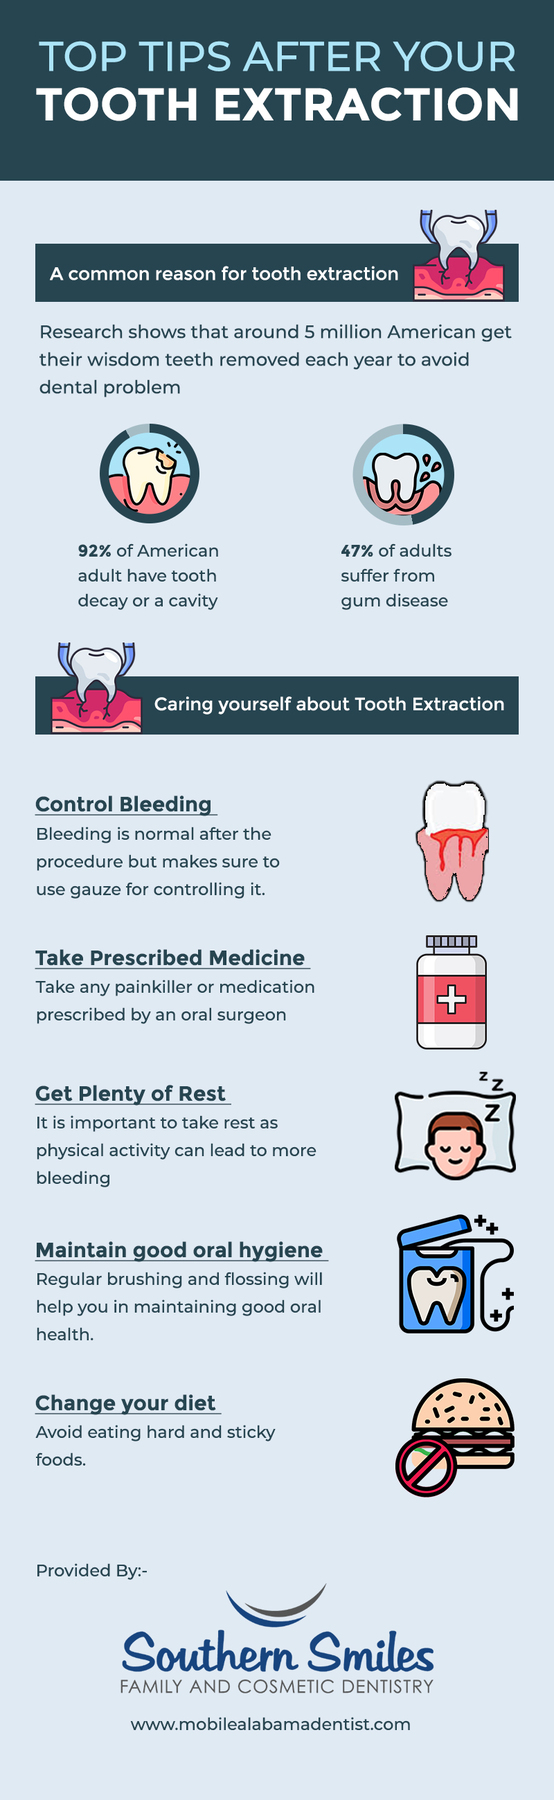 Choose Southern Smiles for Tooth Extraction in Mobile, AL